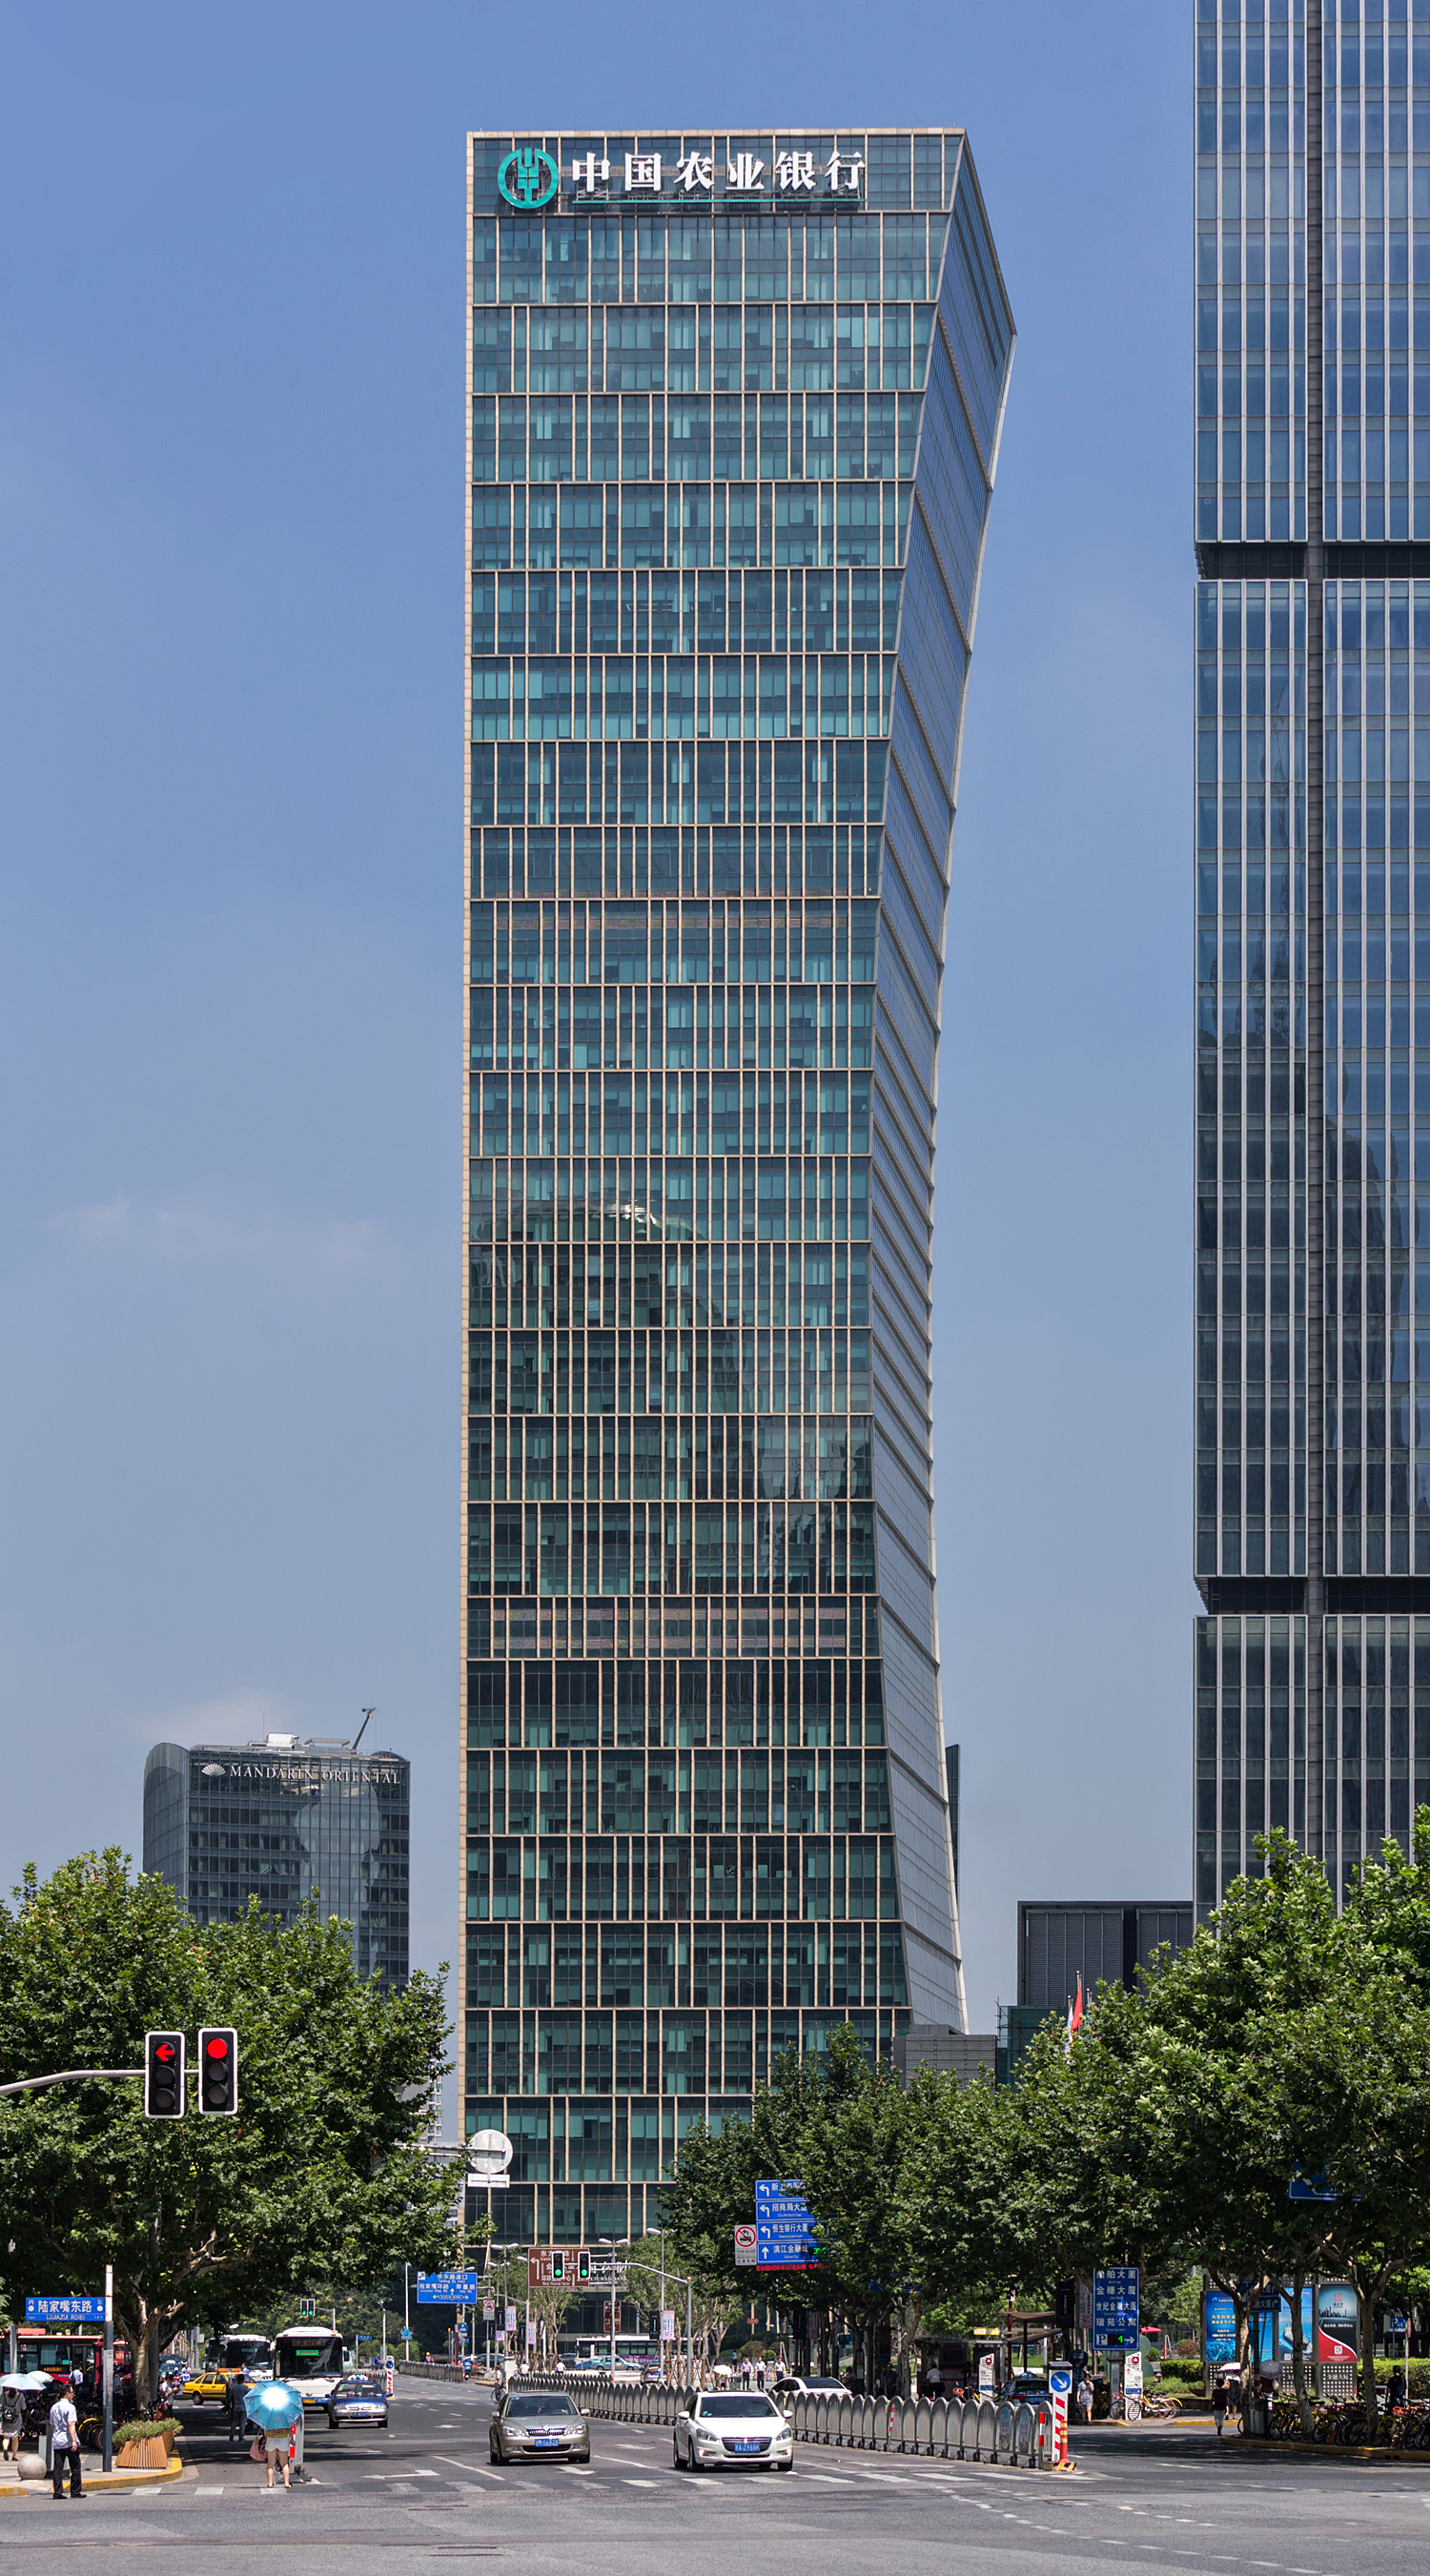 Riviera TwinStar Square 1, Shanghai - View from the south. © Mathias Beinling